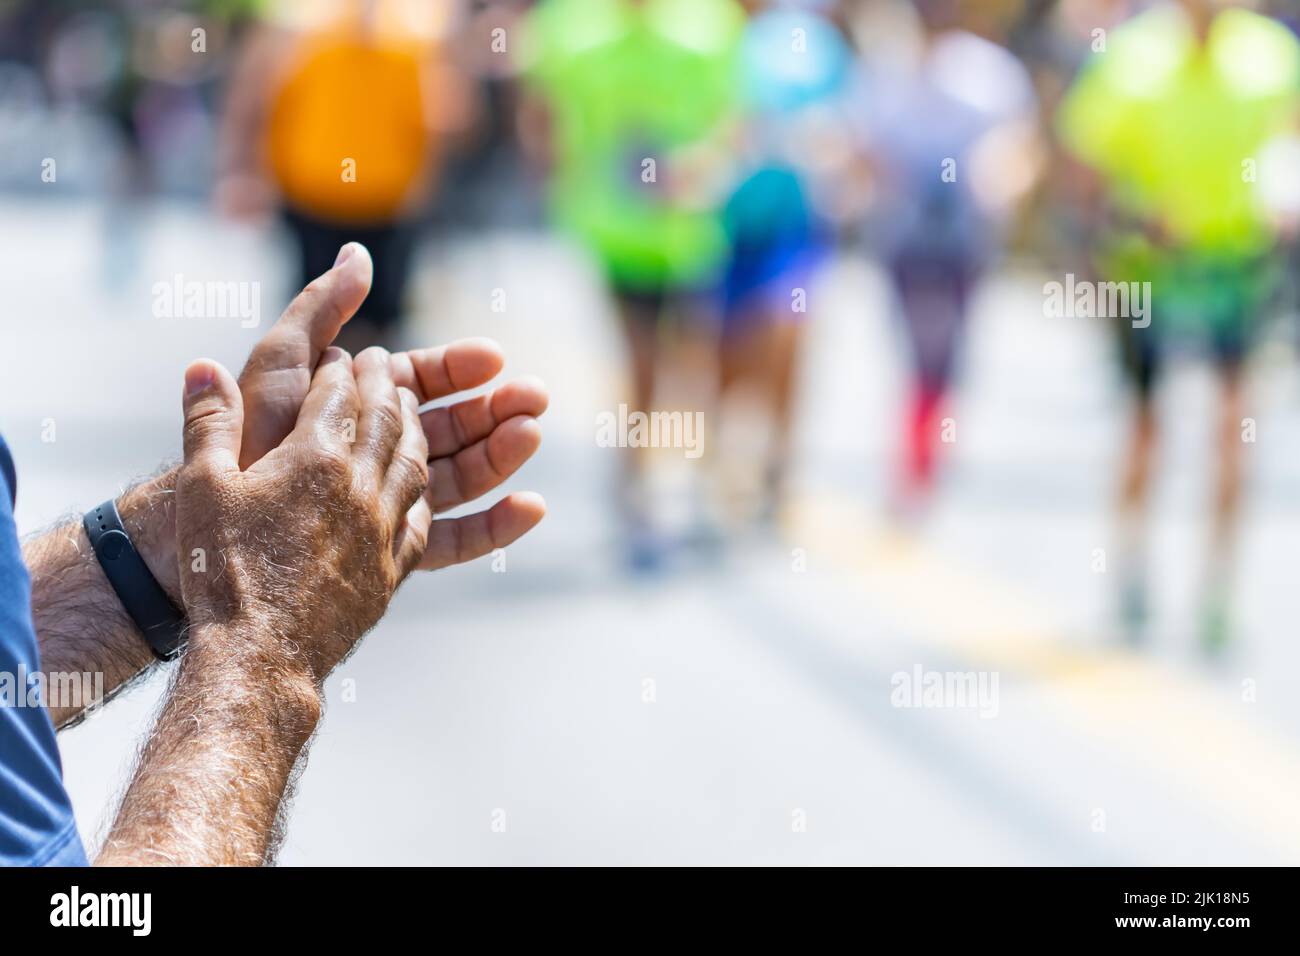 Applause from an unrecognizable man at a track and field marathon, sports concept. Stock Photo